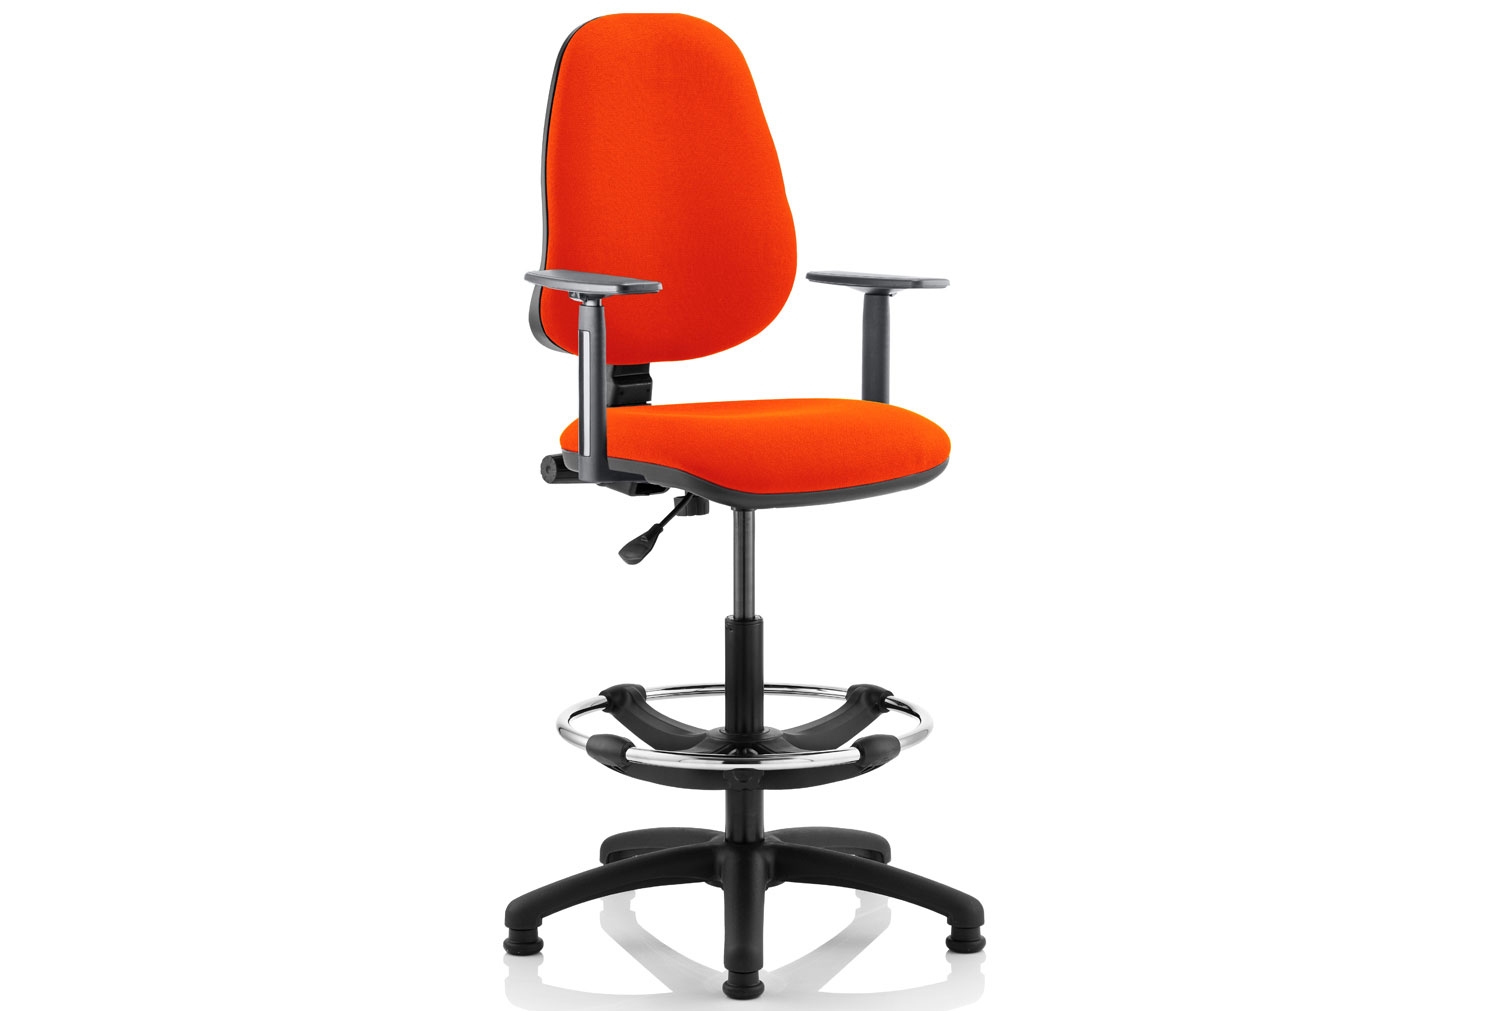 Lunar 1 Lever Draughtsman Office Chair (Adjustable Arms), Tabasco Red